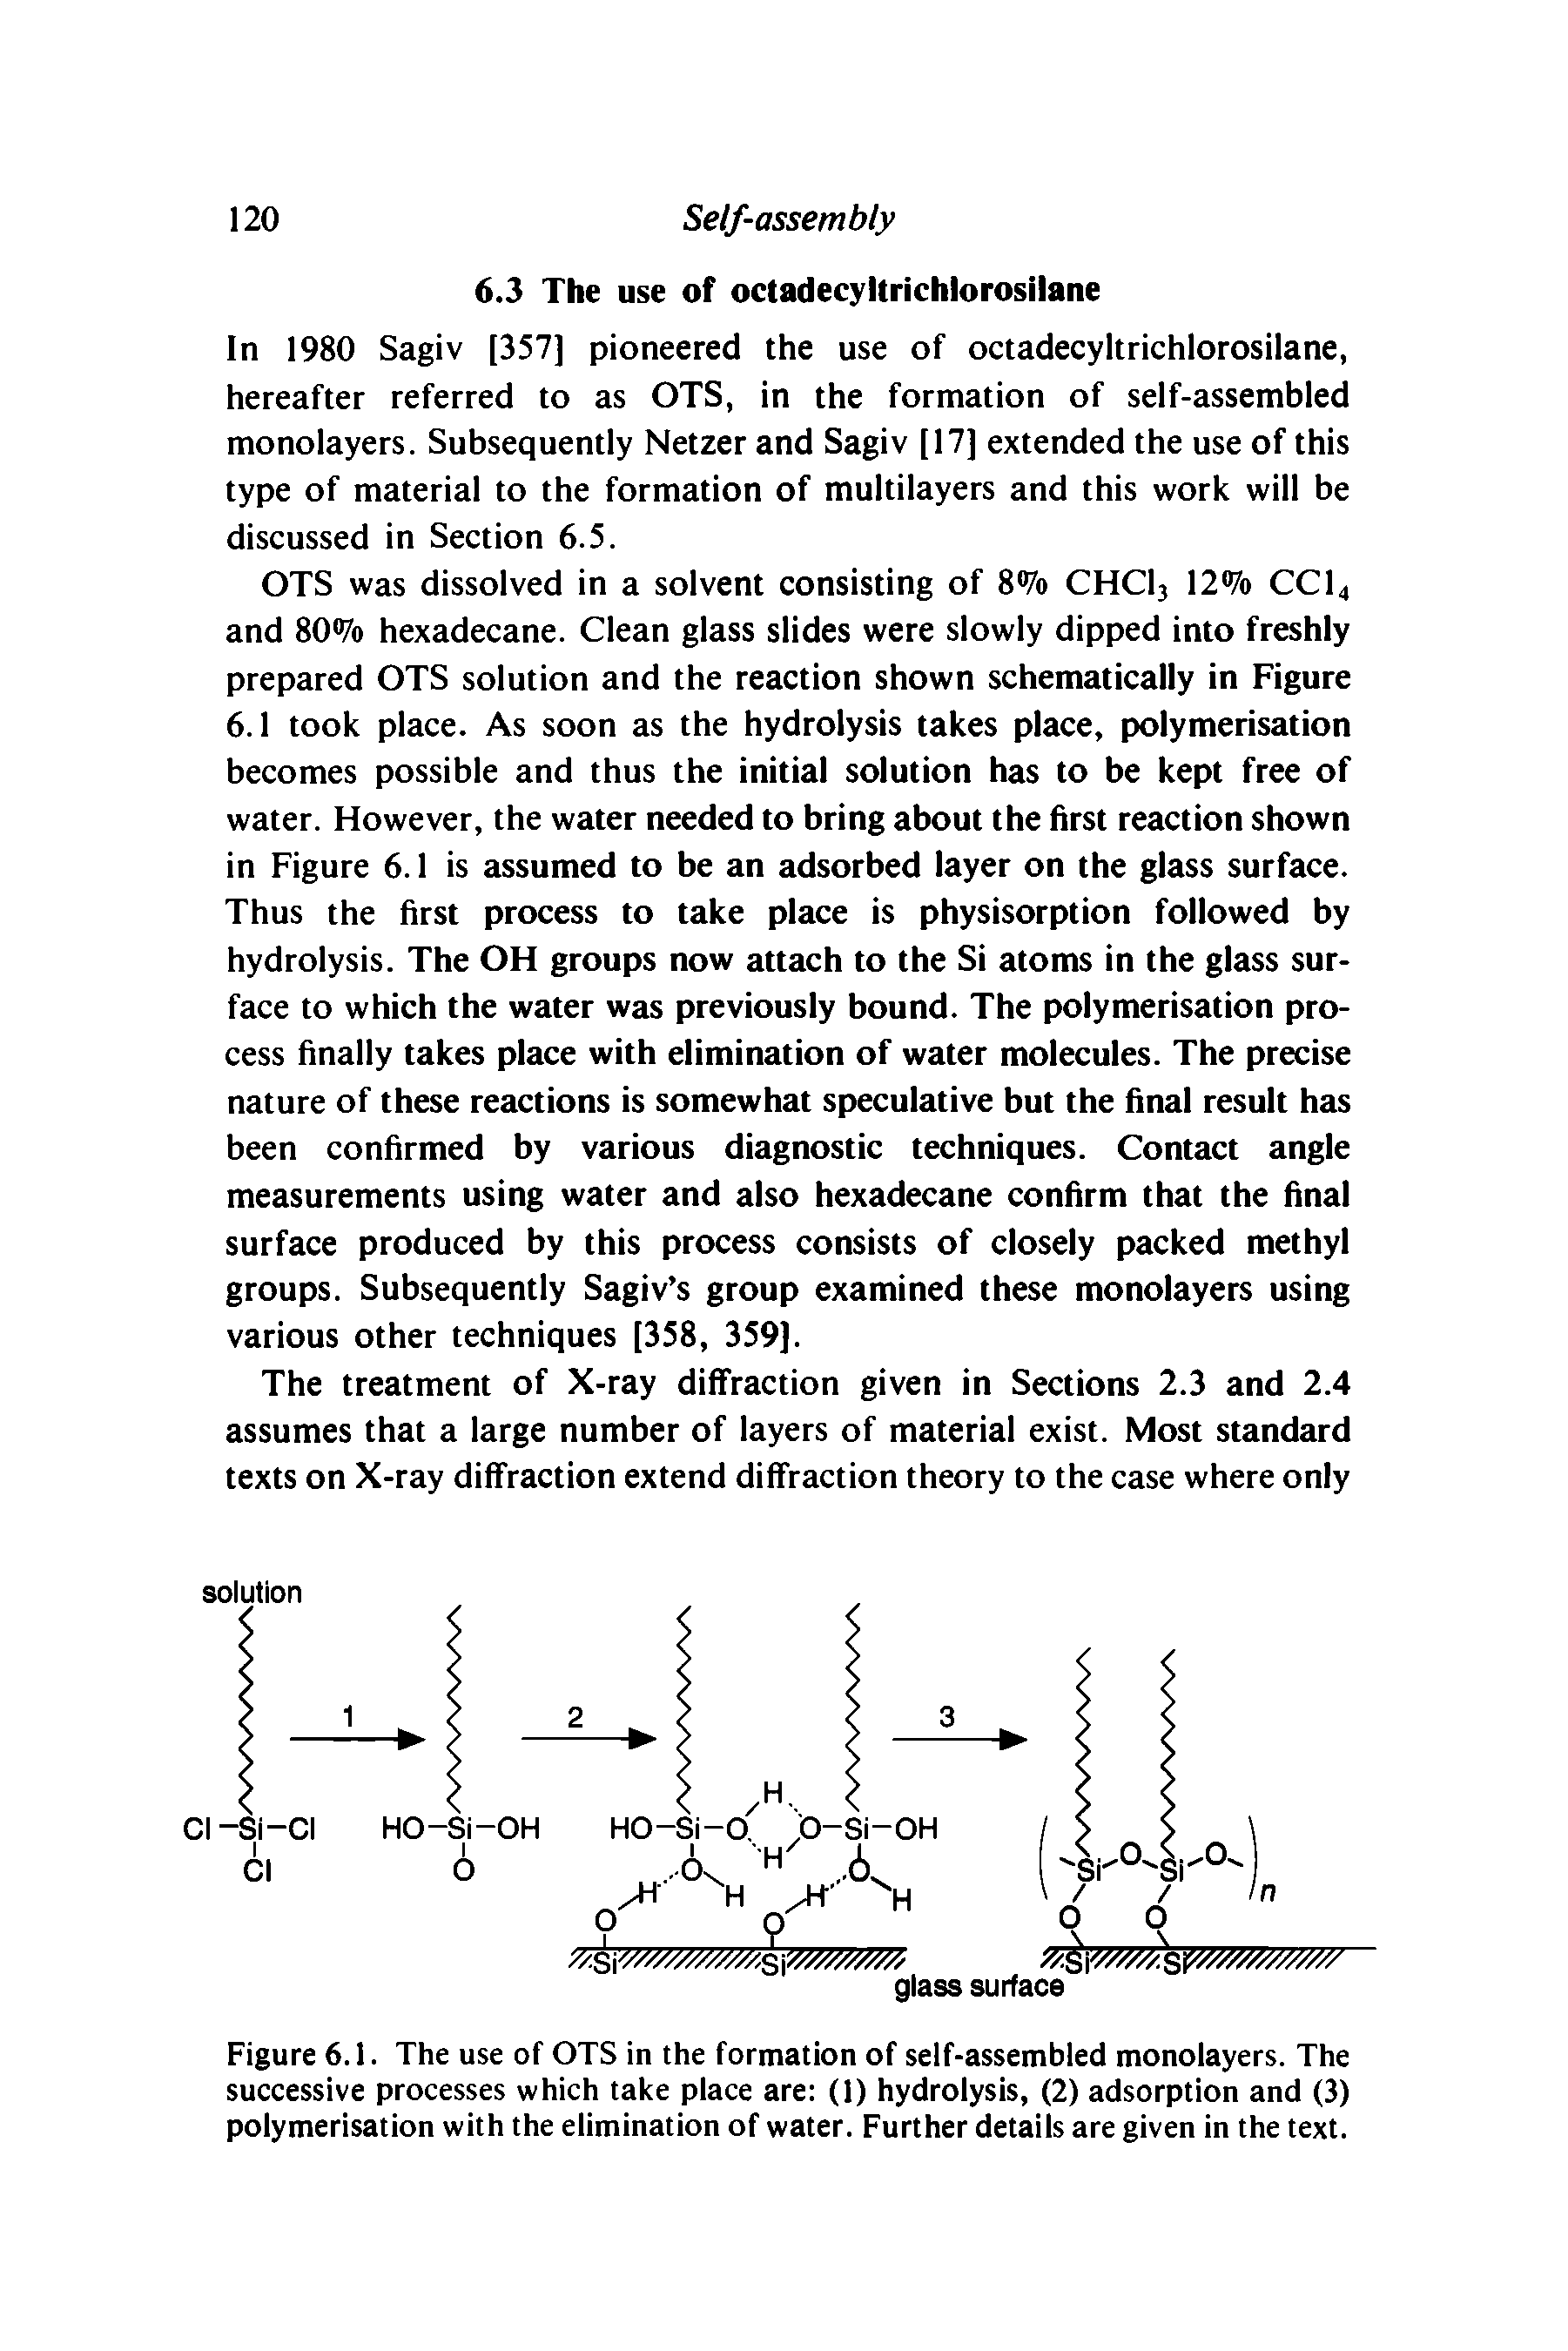 Figure 6.1. The use of OTS in the formation of self-assembled monolayers. The successive processes which take place are (1) hydrolysis, (2) adsorption and (3) polymerisation with the elimination of water. Further details are given in the text.